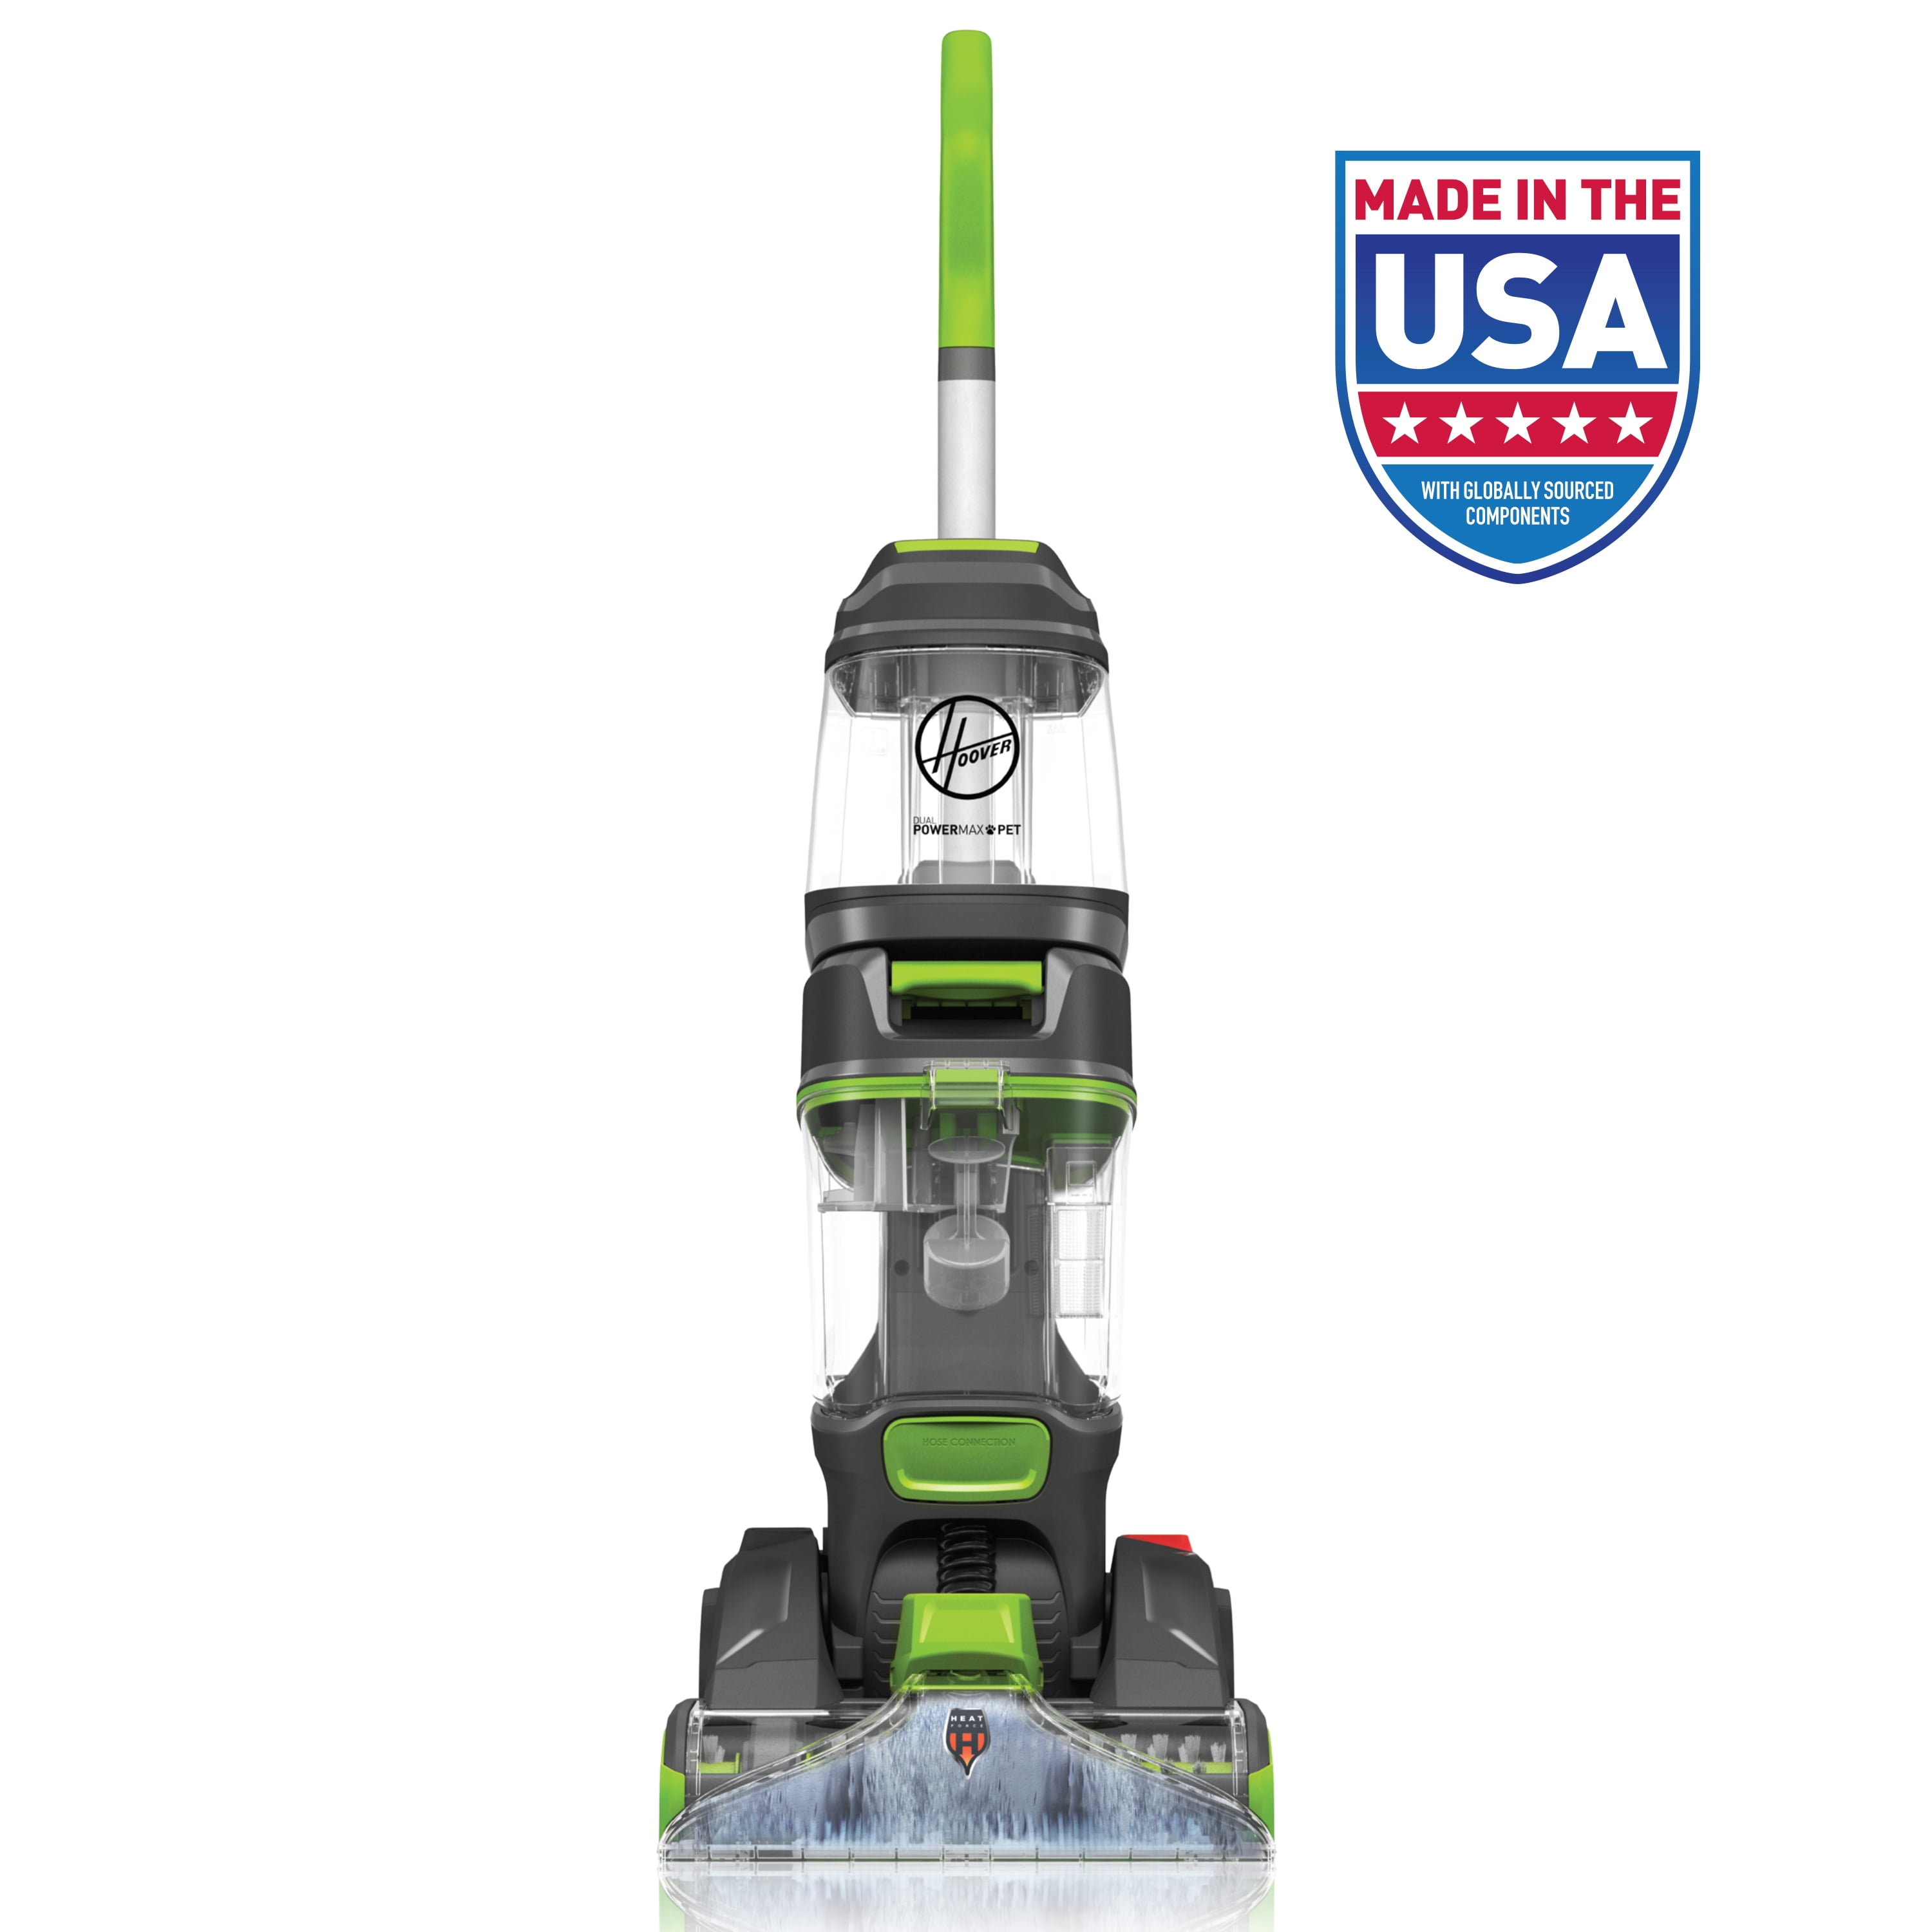 Hoover Dual Power Max Pet Upright Carpet Cleaner Machine with Dual Spin Power Brushes, FH54011